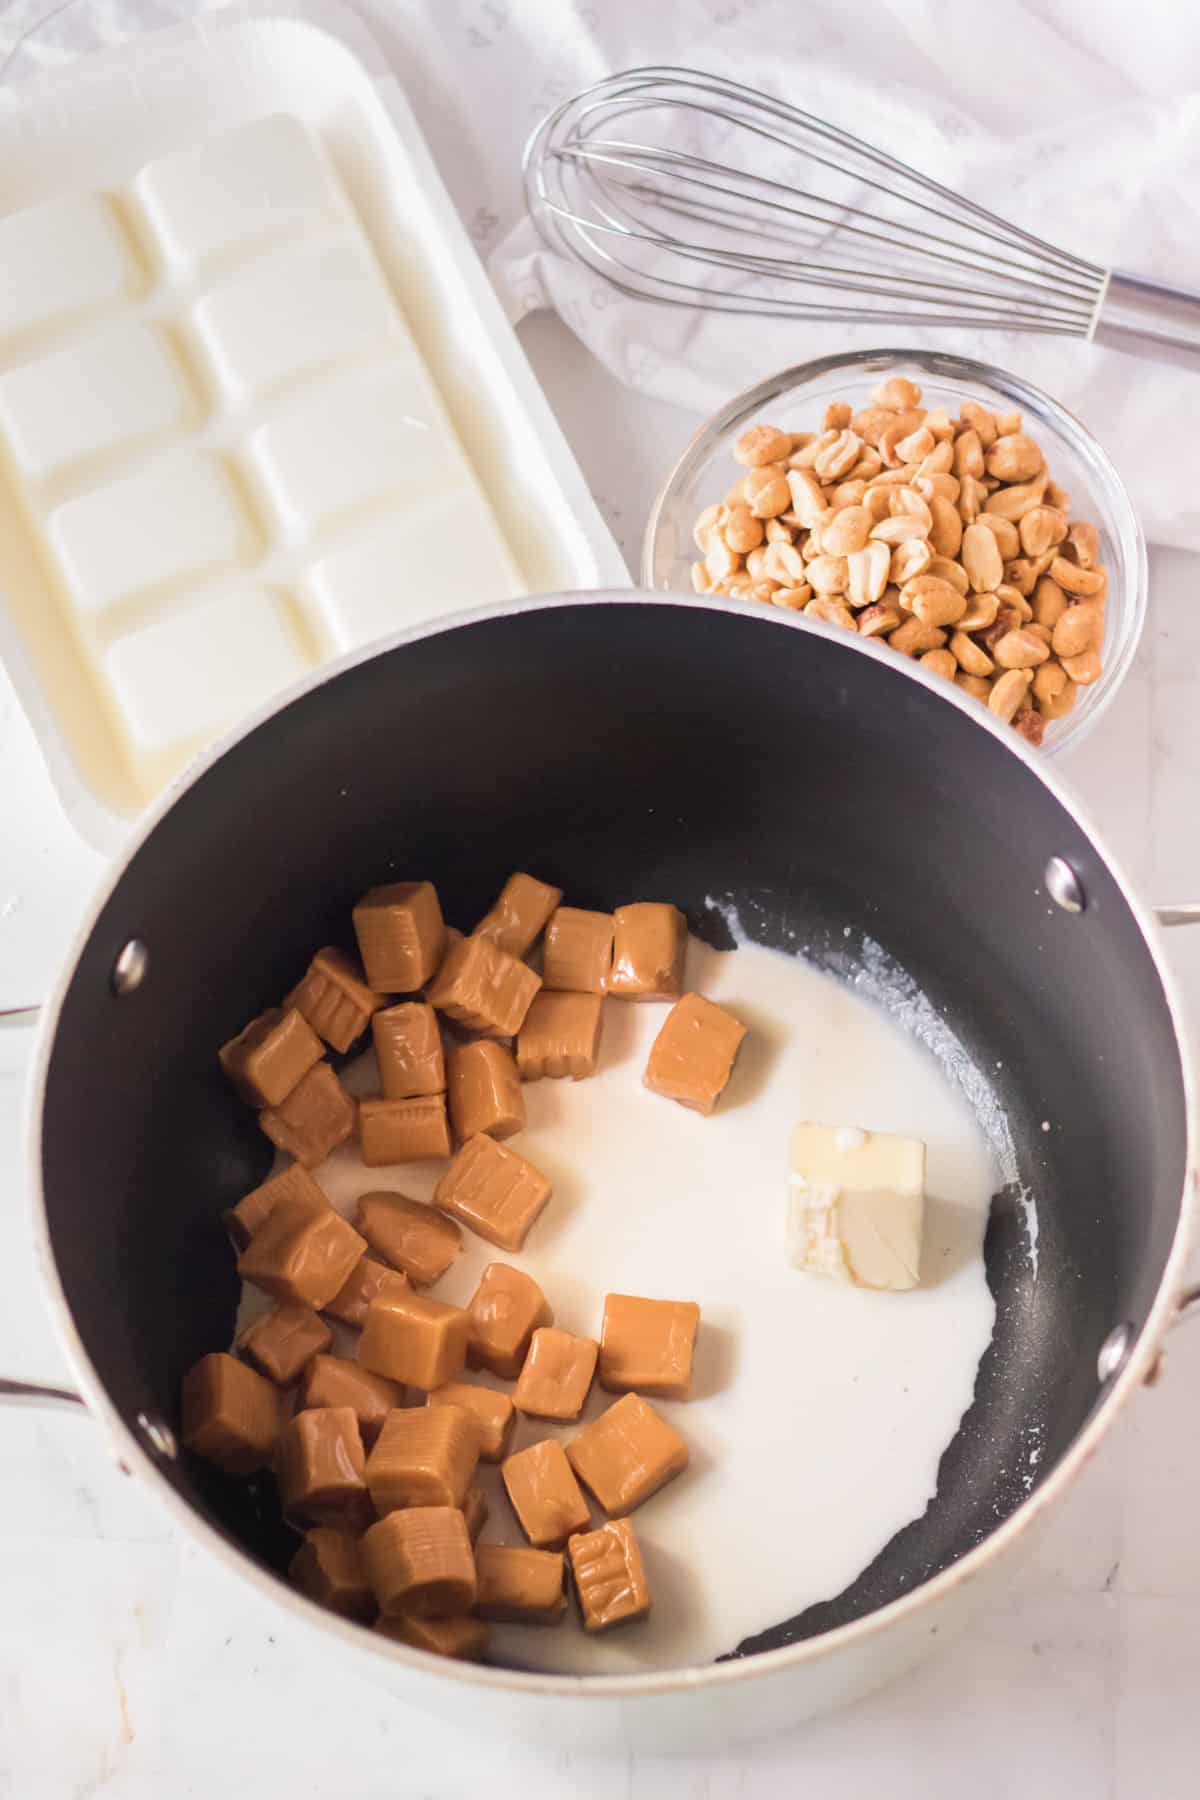 Unwrapped caramels, cream, and butter in saucepan.